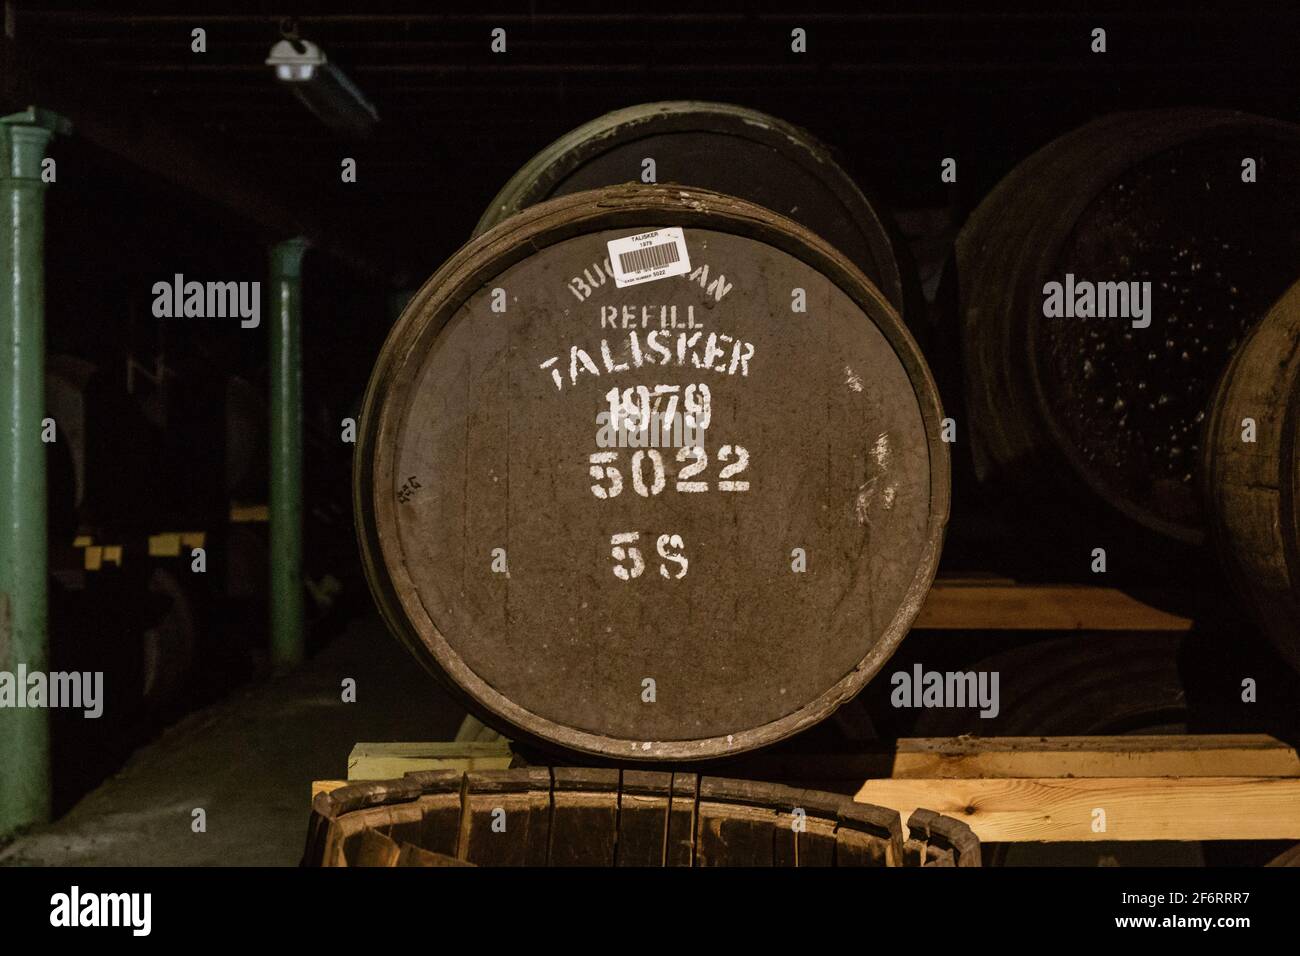 Whisky barrels at the Talisker distillery on the Isle of Skye, Scotland, UK in August 2019. Stock Photo